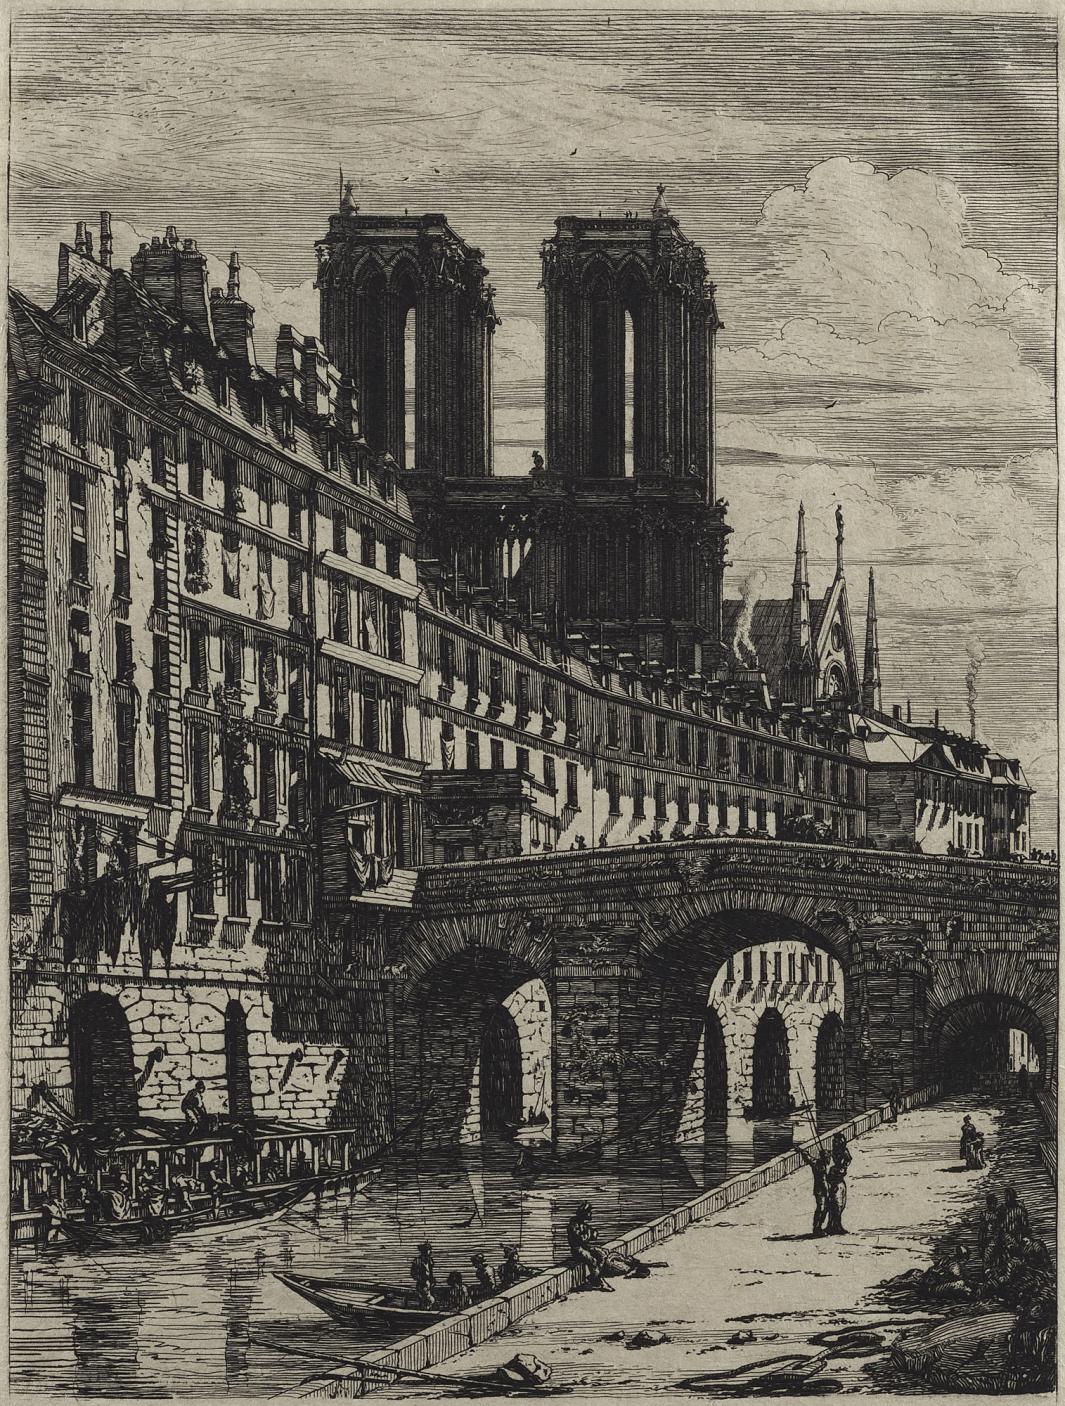 etching of a small bridge crossing the river Seine in Paris.